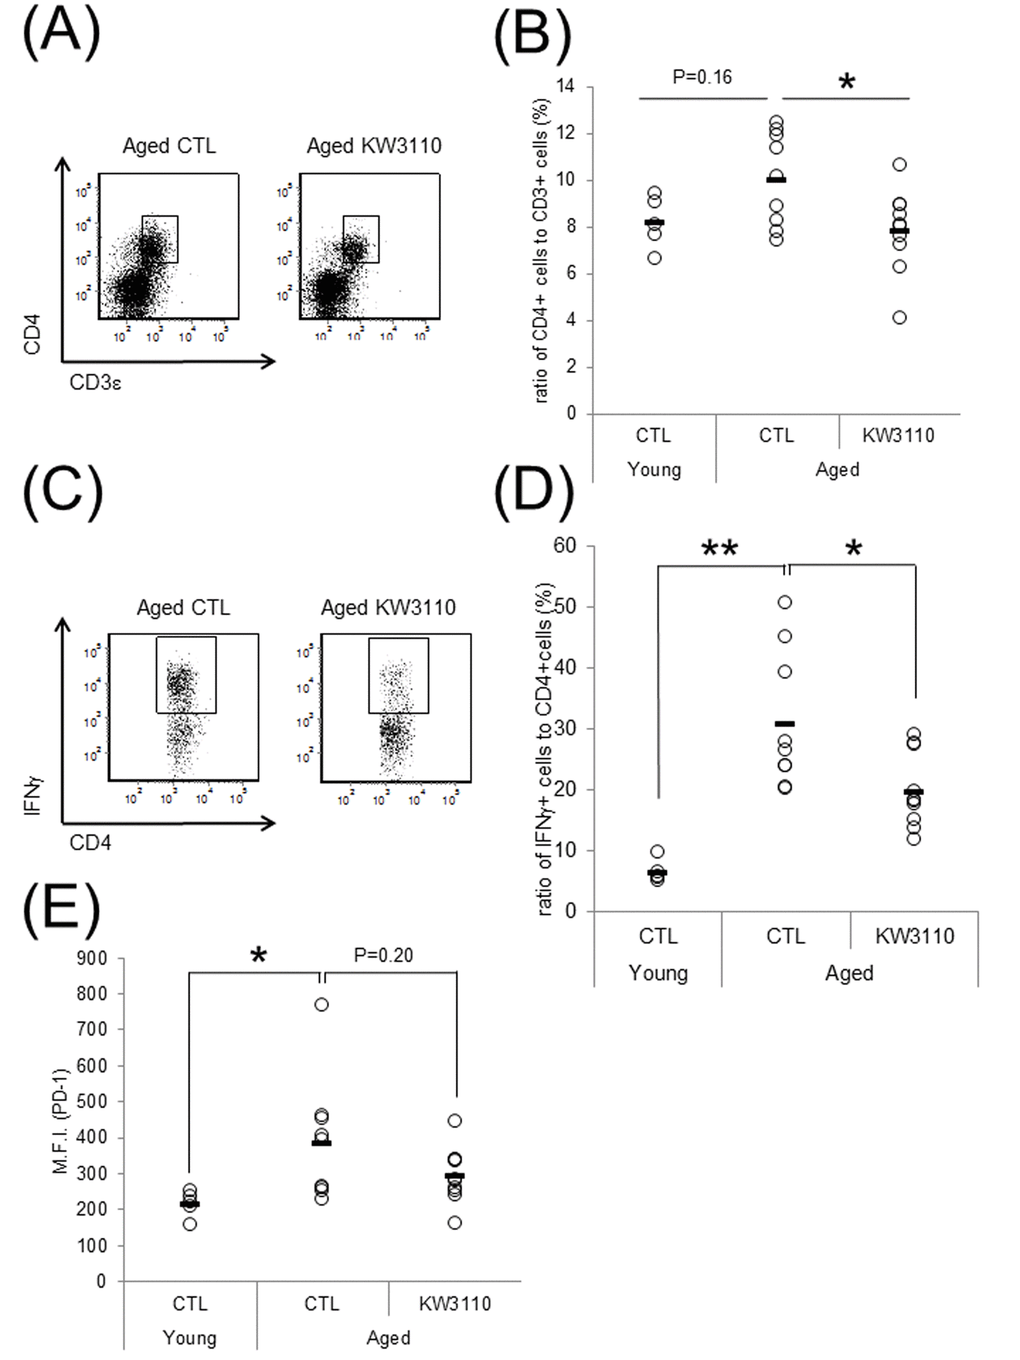 Intake of Lactobacillus paracasei KW3110 suppressed the inflammatory CD4-positive T cell expansion in the lamina propia of the small intestine (SI-LP). (A and B) To detect inflammatory cytokine-producing cells, SI-LP cells from young mice (3-months-old) and aged mice (17-months-old) were cultured under stimulation with Leukocyte Activation Cocktail plus BD GolgiPlug, and analyzed by flow cytometry. (A) Representative data of CD4-positive cells from aged mice fed a diet with (KW3110) or without (CTL) L. paracasei KW3110. (B) The ratio of CD3ε- and CD4-positive to live cells. (C) Representative data of CD4- and interferon gamma (IFN-γ)-positive cells from aged mice fed a diet with or without L. paracasei KW3110. (D) The ratio of CD4- and IFN-γ-positive cells to CD4-positive cells. (E) The expressions of programmed cell death protein 1 (PD-1) in CD3ε- and CD4-positive cells were analyzed by flow cytometry. M.F.I. indicates mean fluorescence intensity.